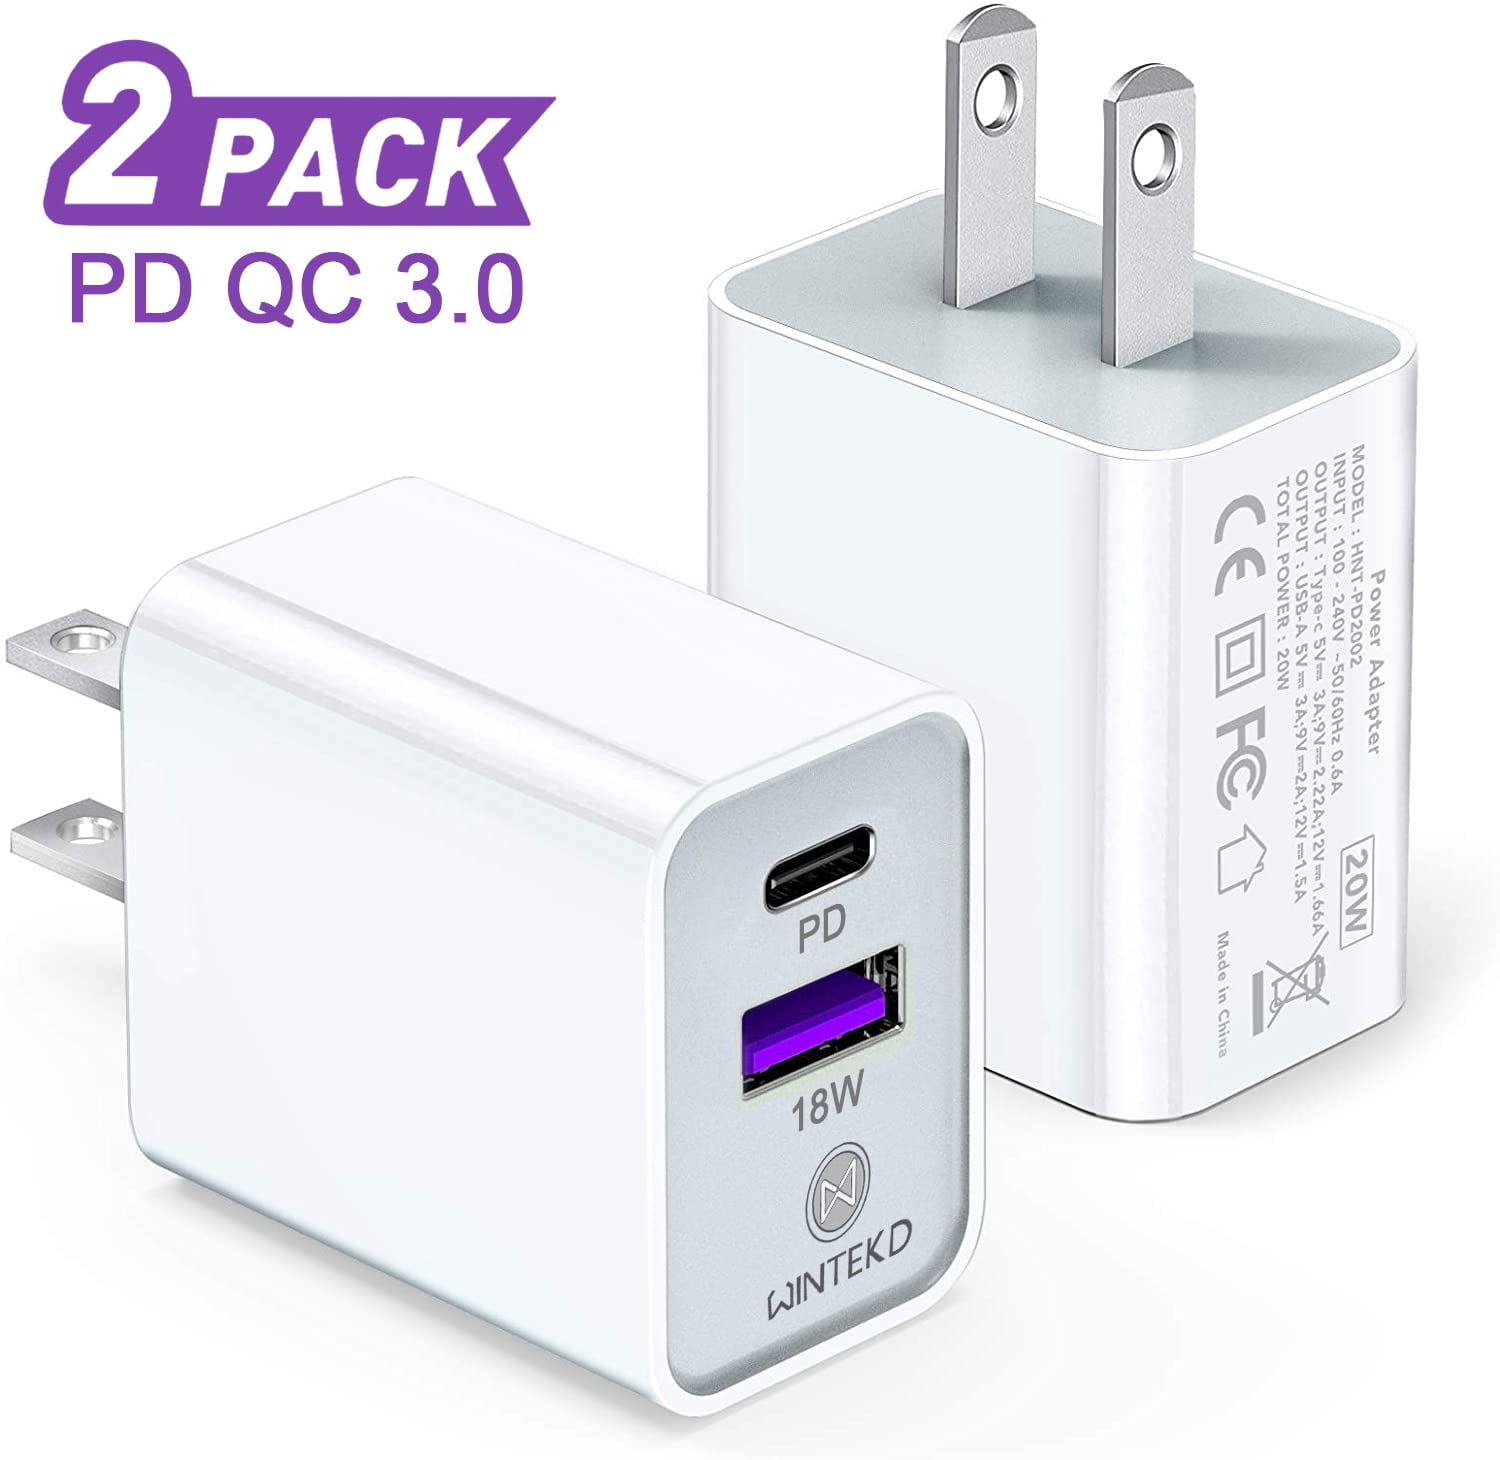 iPad Pro and More-Black USB C Wall Charger Pofesun 18W Wall Charger Type C PD 3.0 Fast Charging Power Adapter Compatible with iPhone 11/11 Pro / 11 Pro Max/XR/XS/X/8 Plus/8,Samsung Galaxy S10+ S9 Plus S8 Plus Note 8 9 10 Pixel 